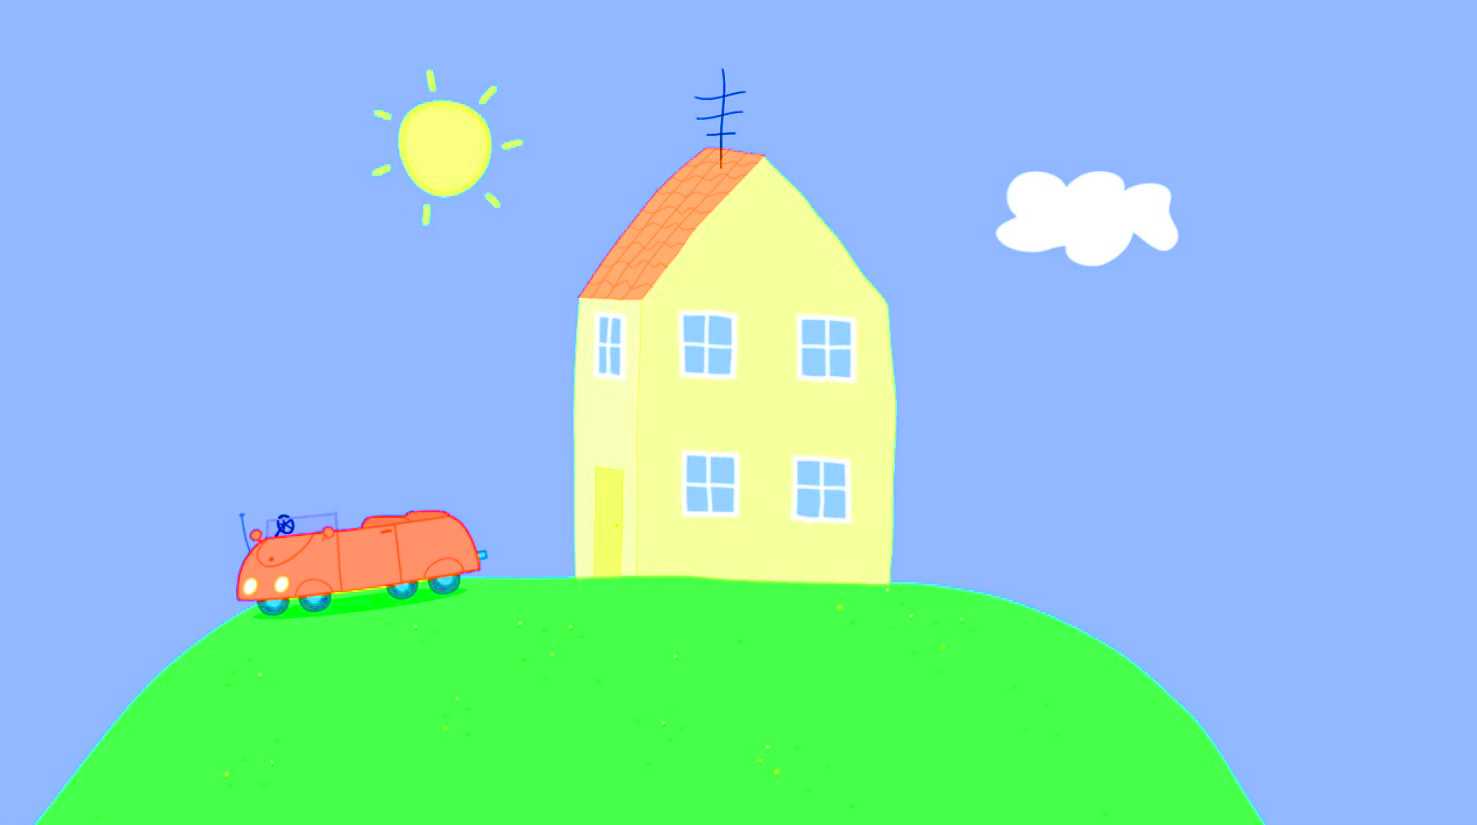 Peppa Pig House Hd Wallpapers Wallpaper Cave